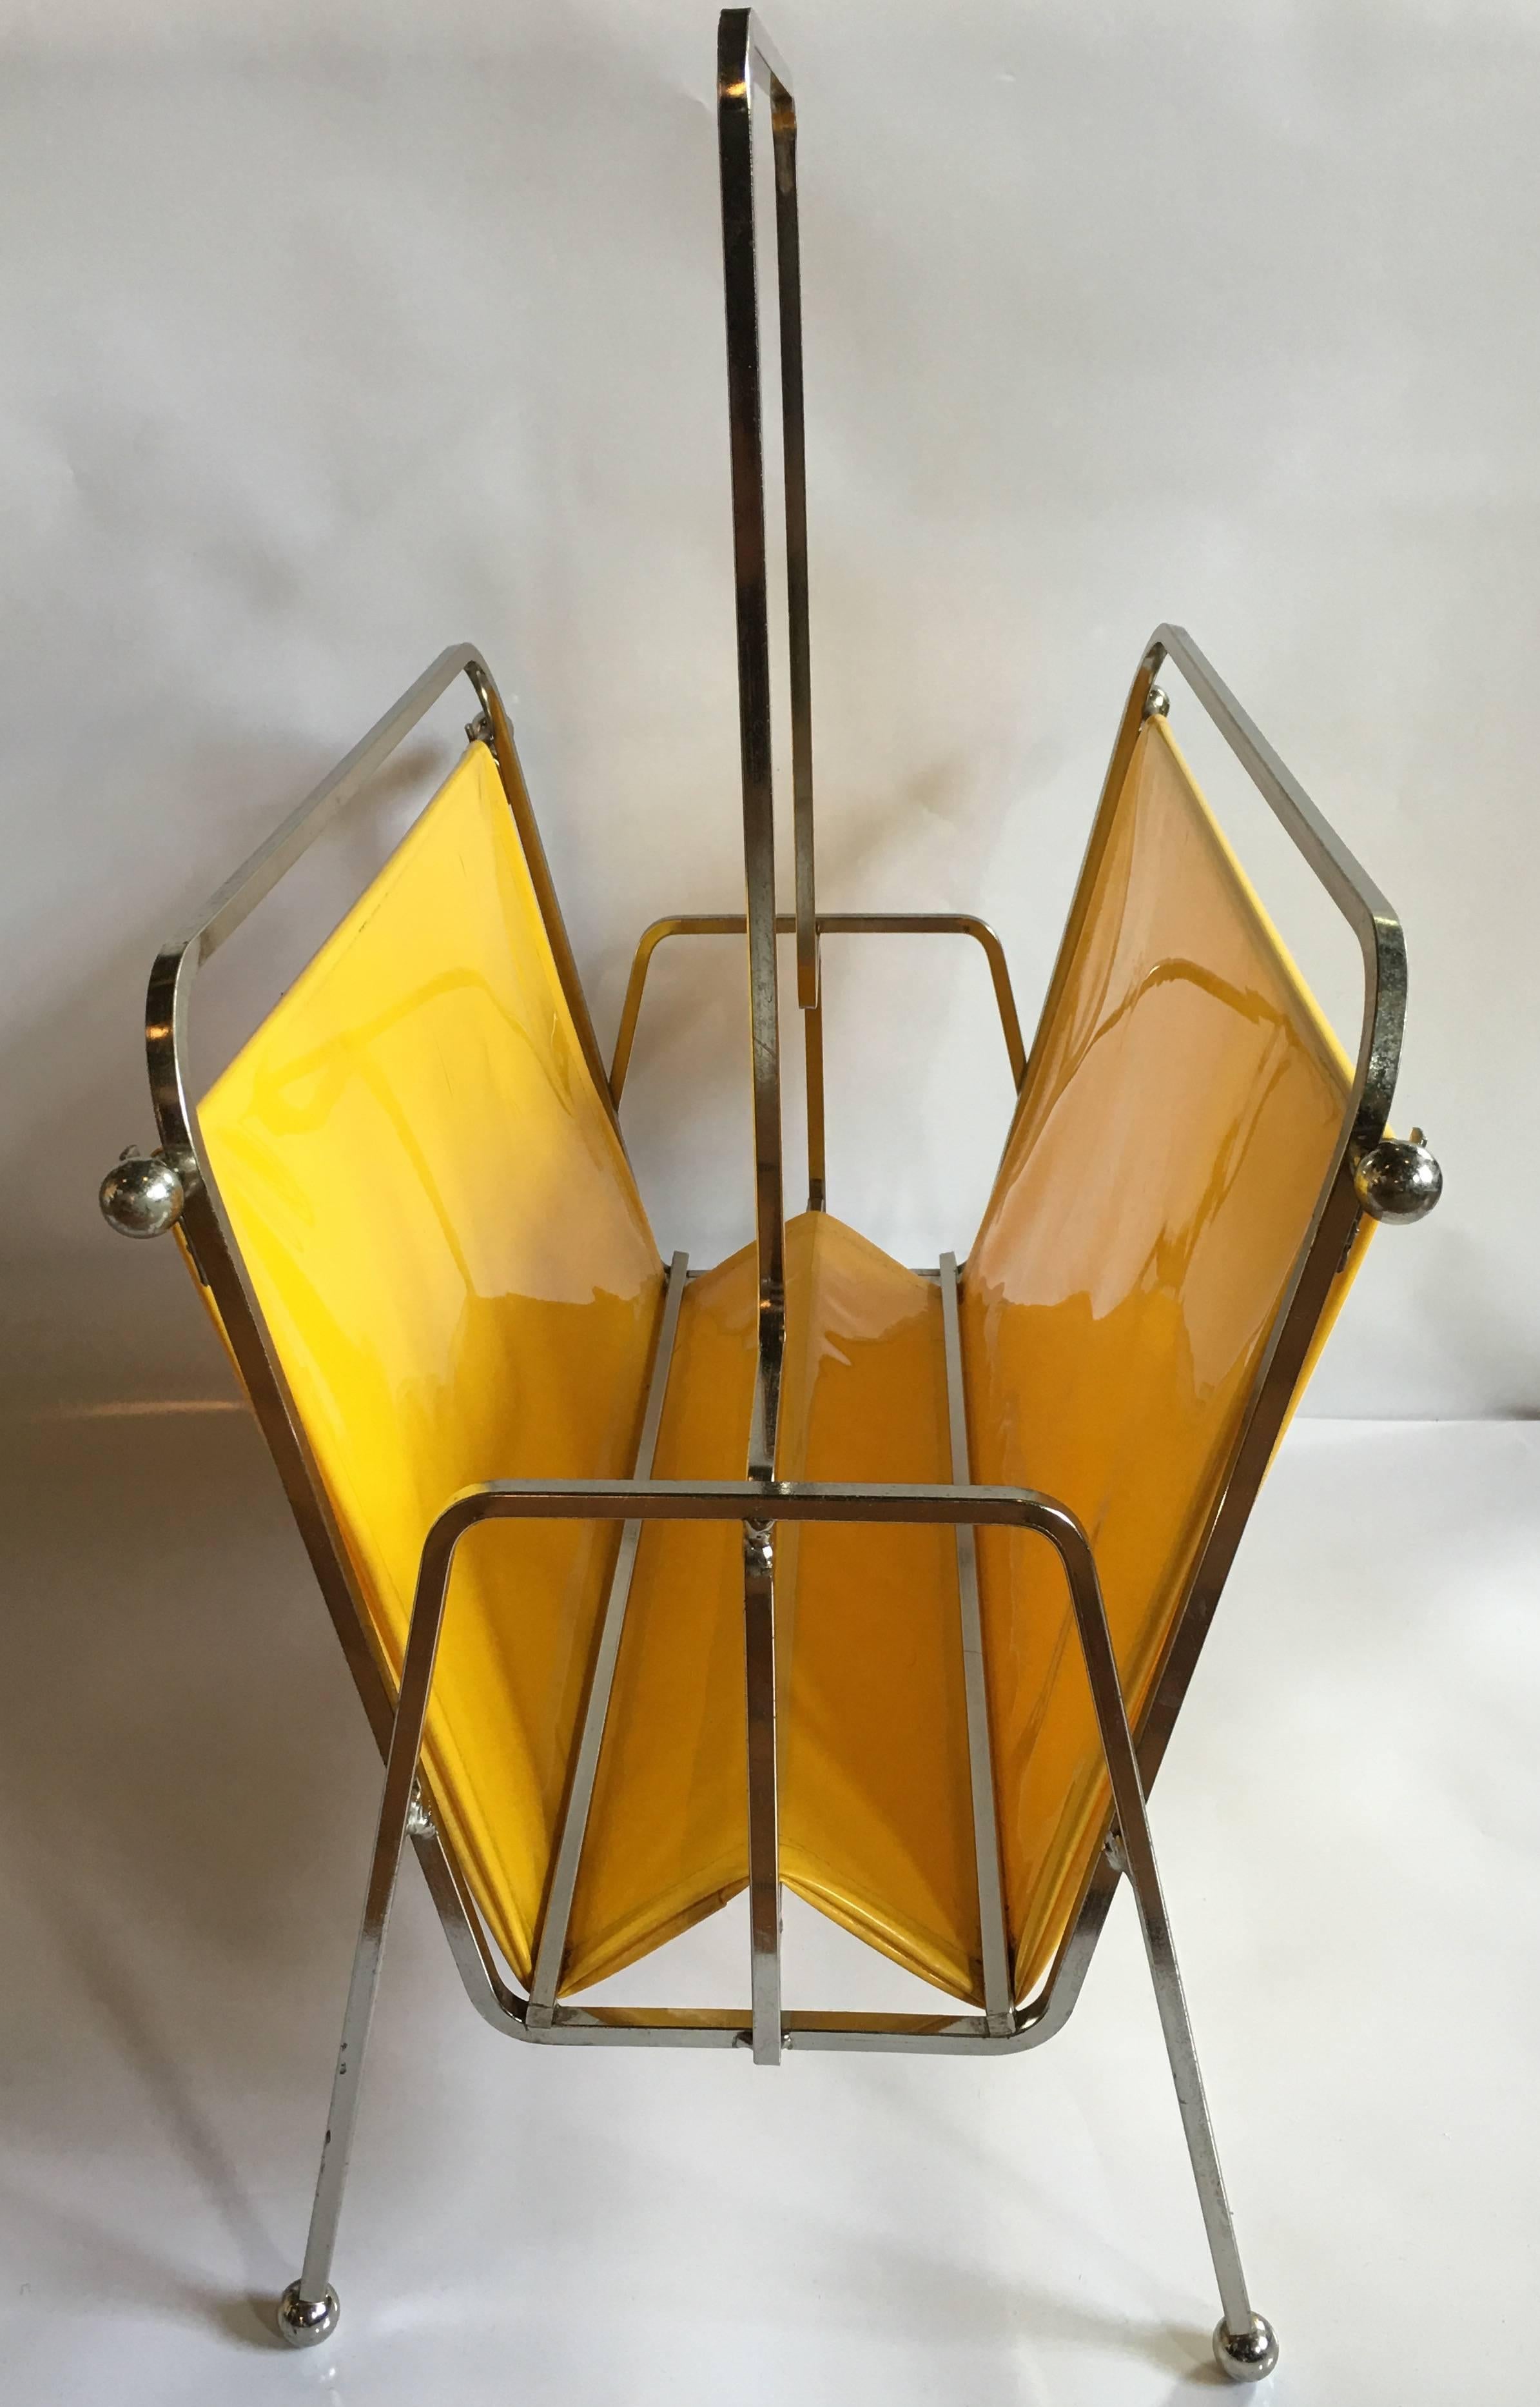 Mid-Century Modern magazine rack holder in the style of Jacques Adnet.
Chrome frame with original vibrant yellow vinyl liner.